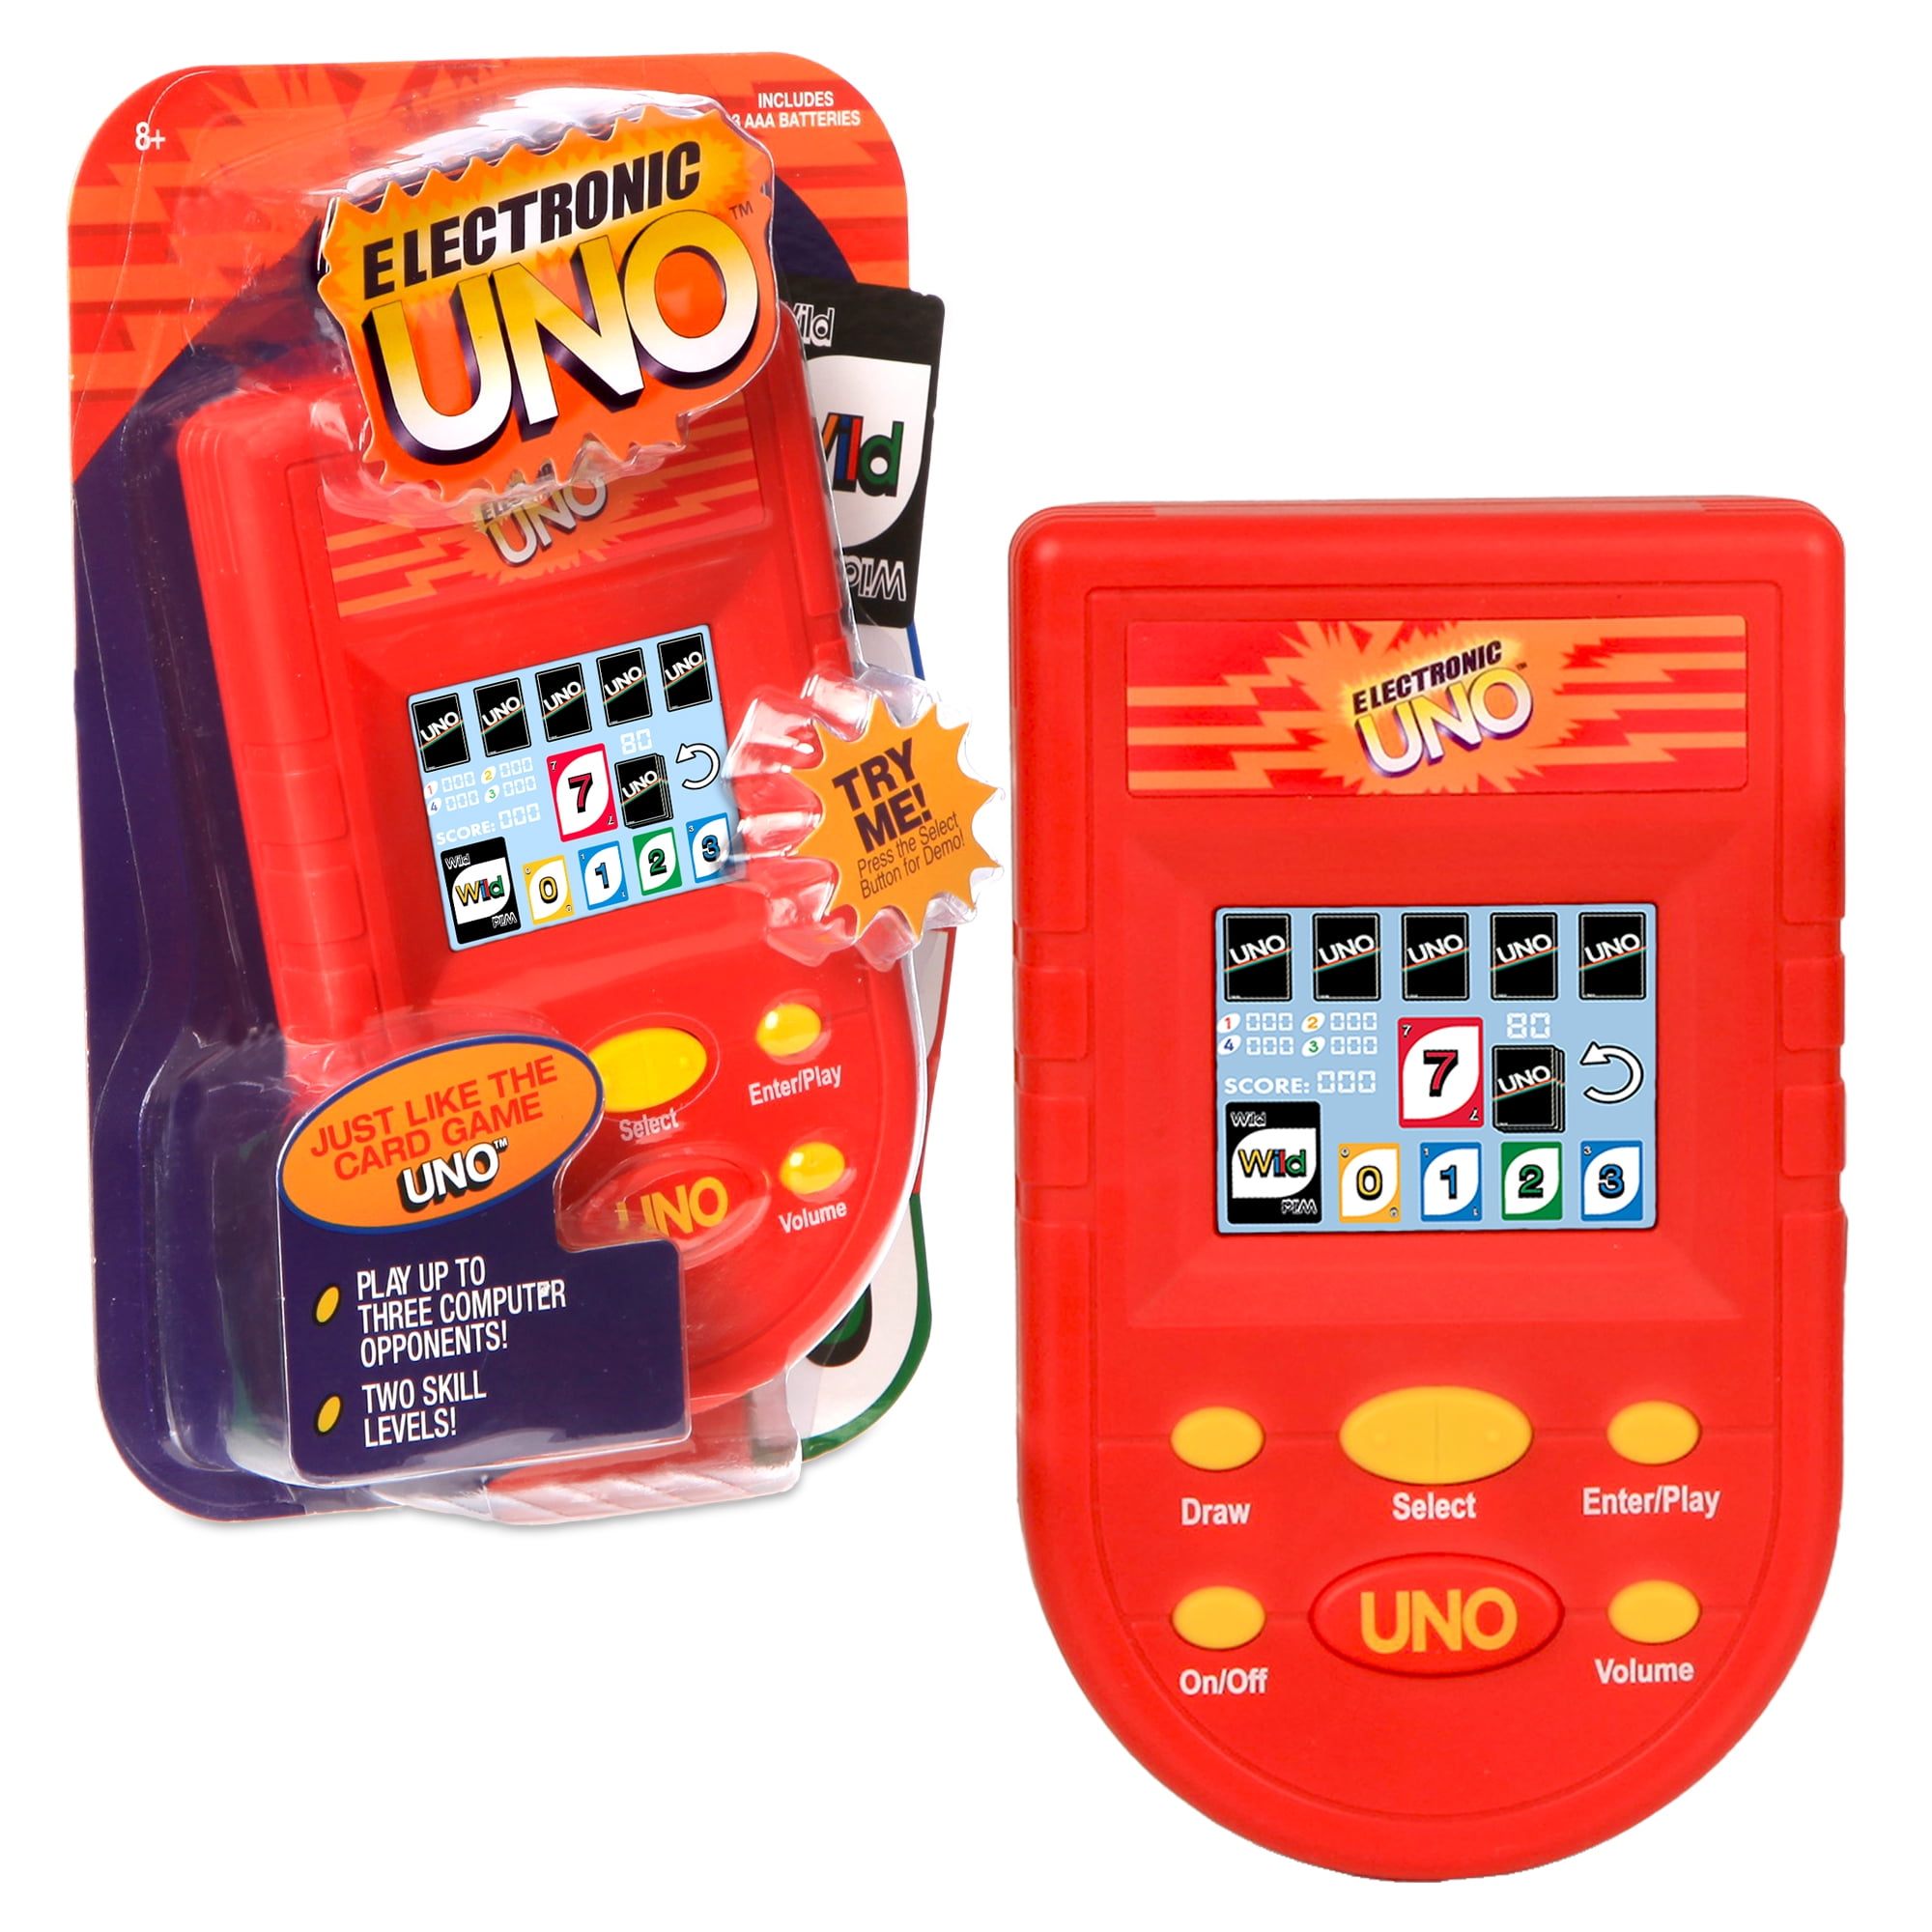 Trademark Global Electronic Handheld 5 in 1 Poker Game for sale online 